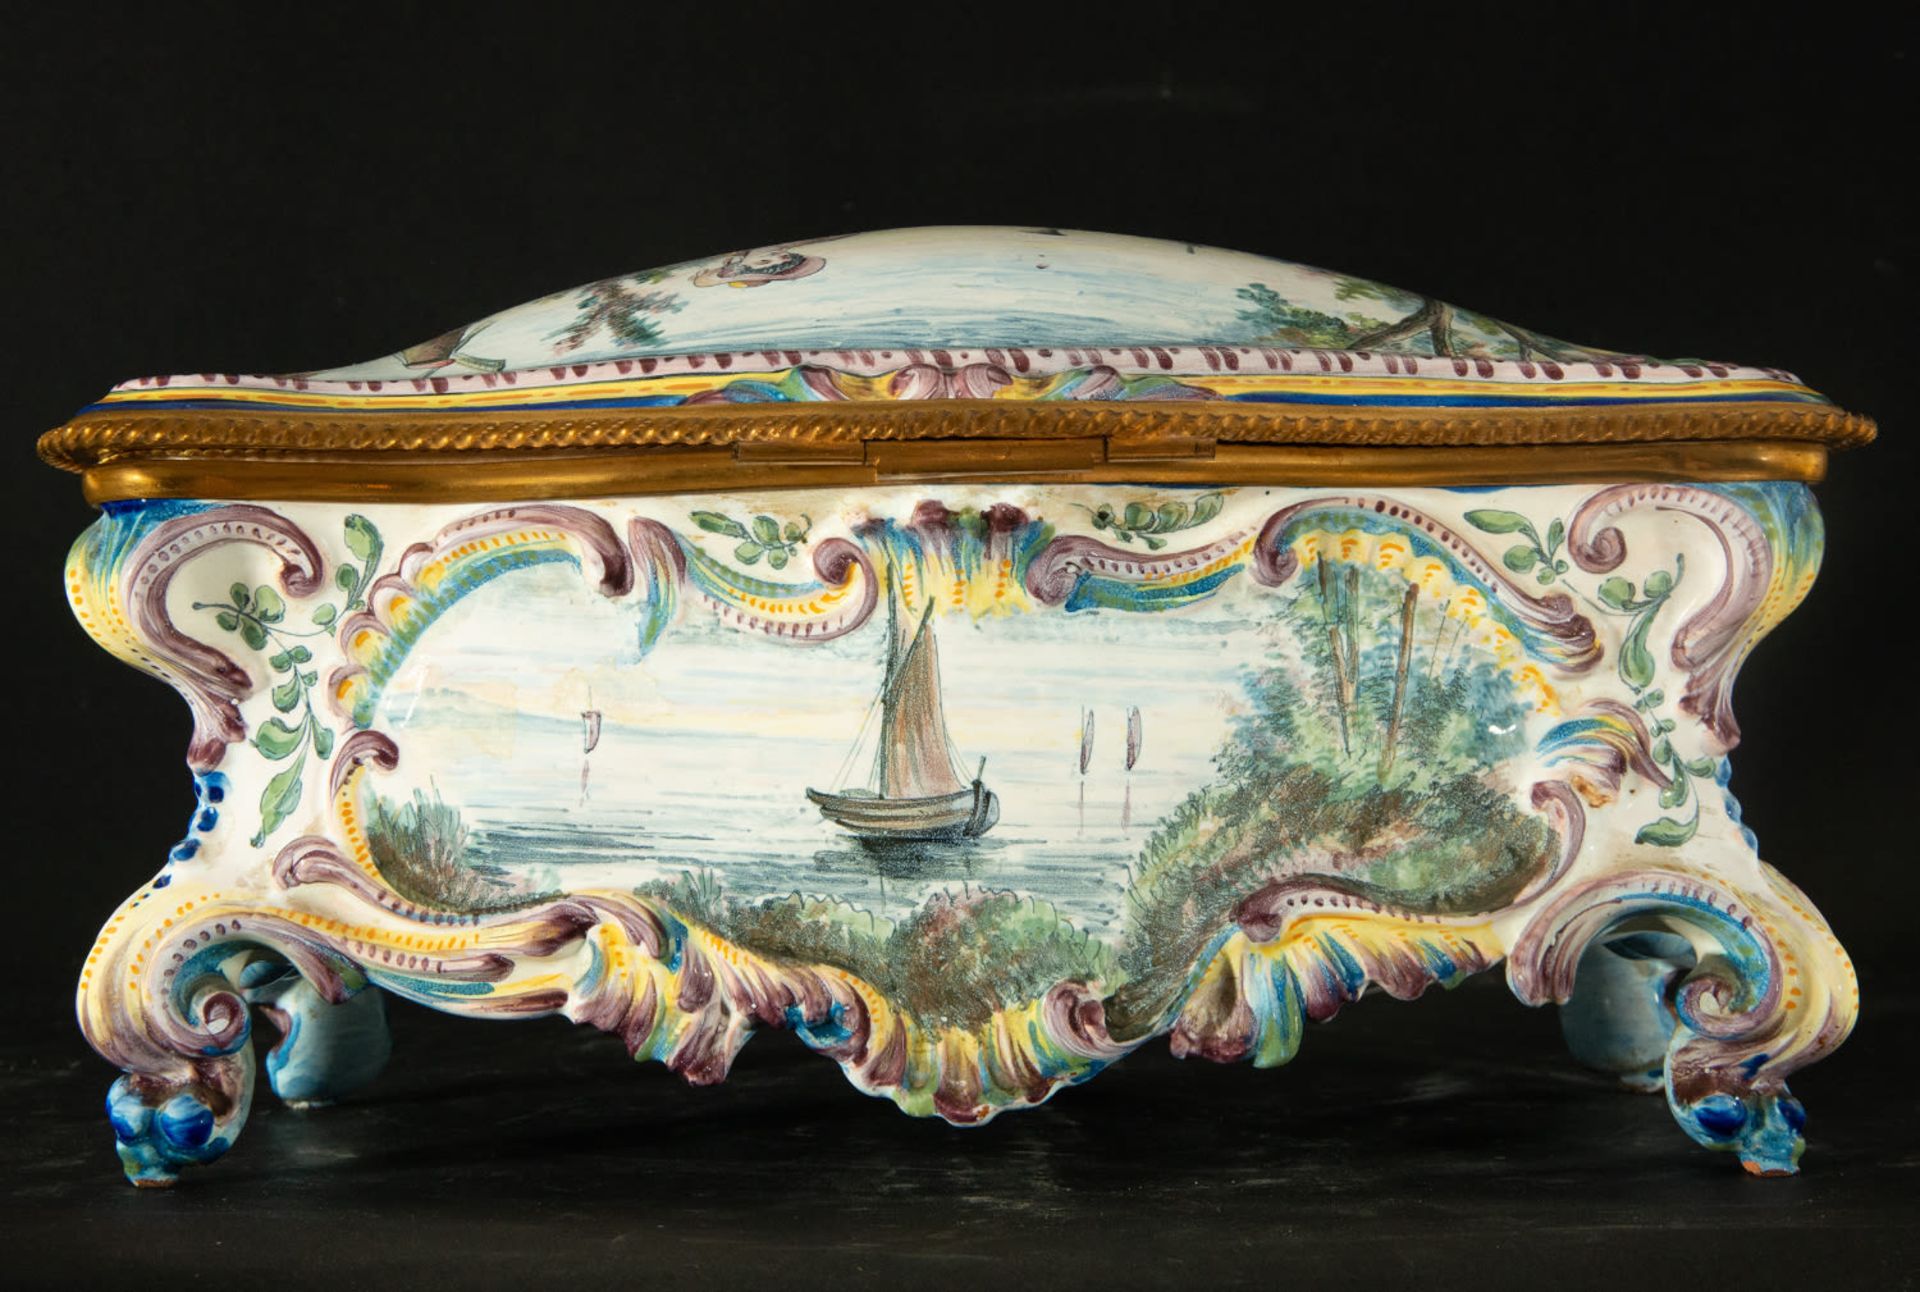 Magnificent Marseille porcelain jewelry box with gallant scene, 19th century - Image 6 of 7